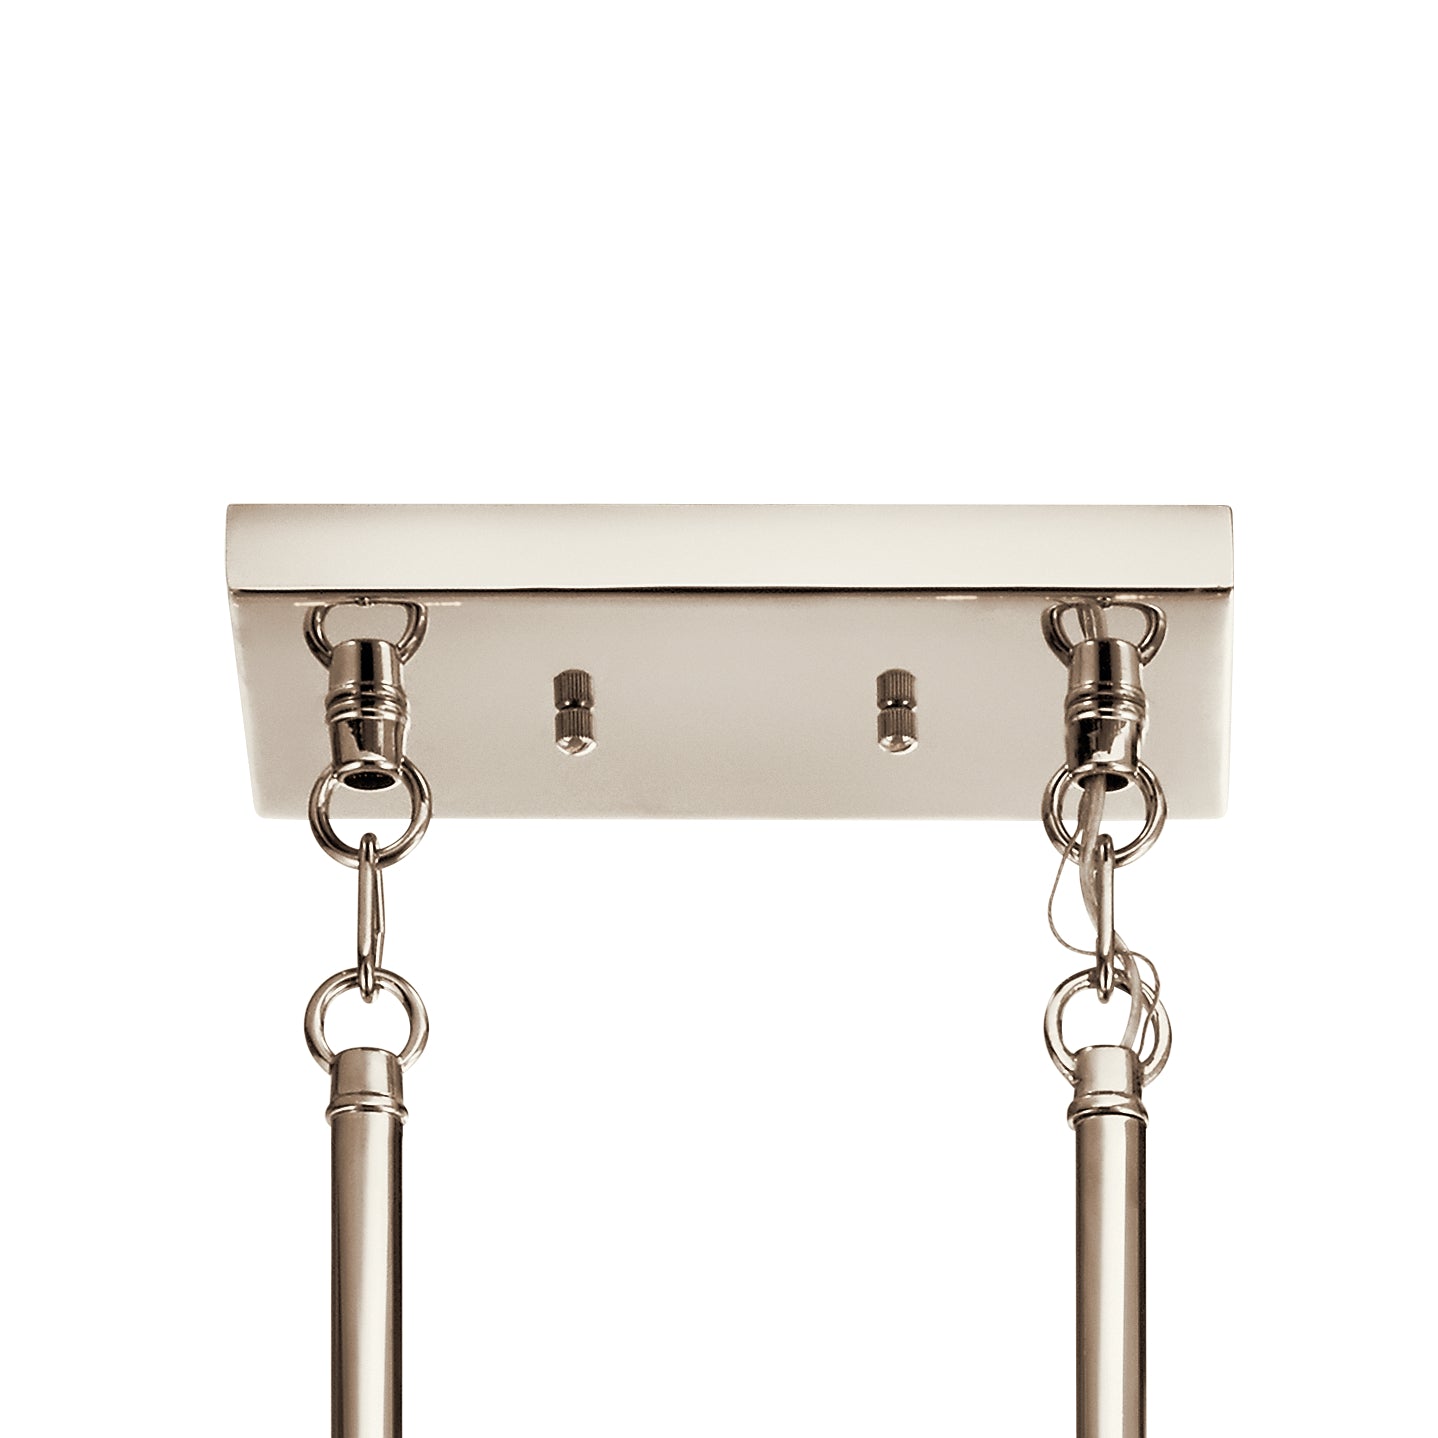 Cleara Linear Suspension Polished Nickel